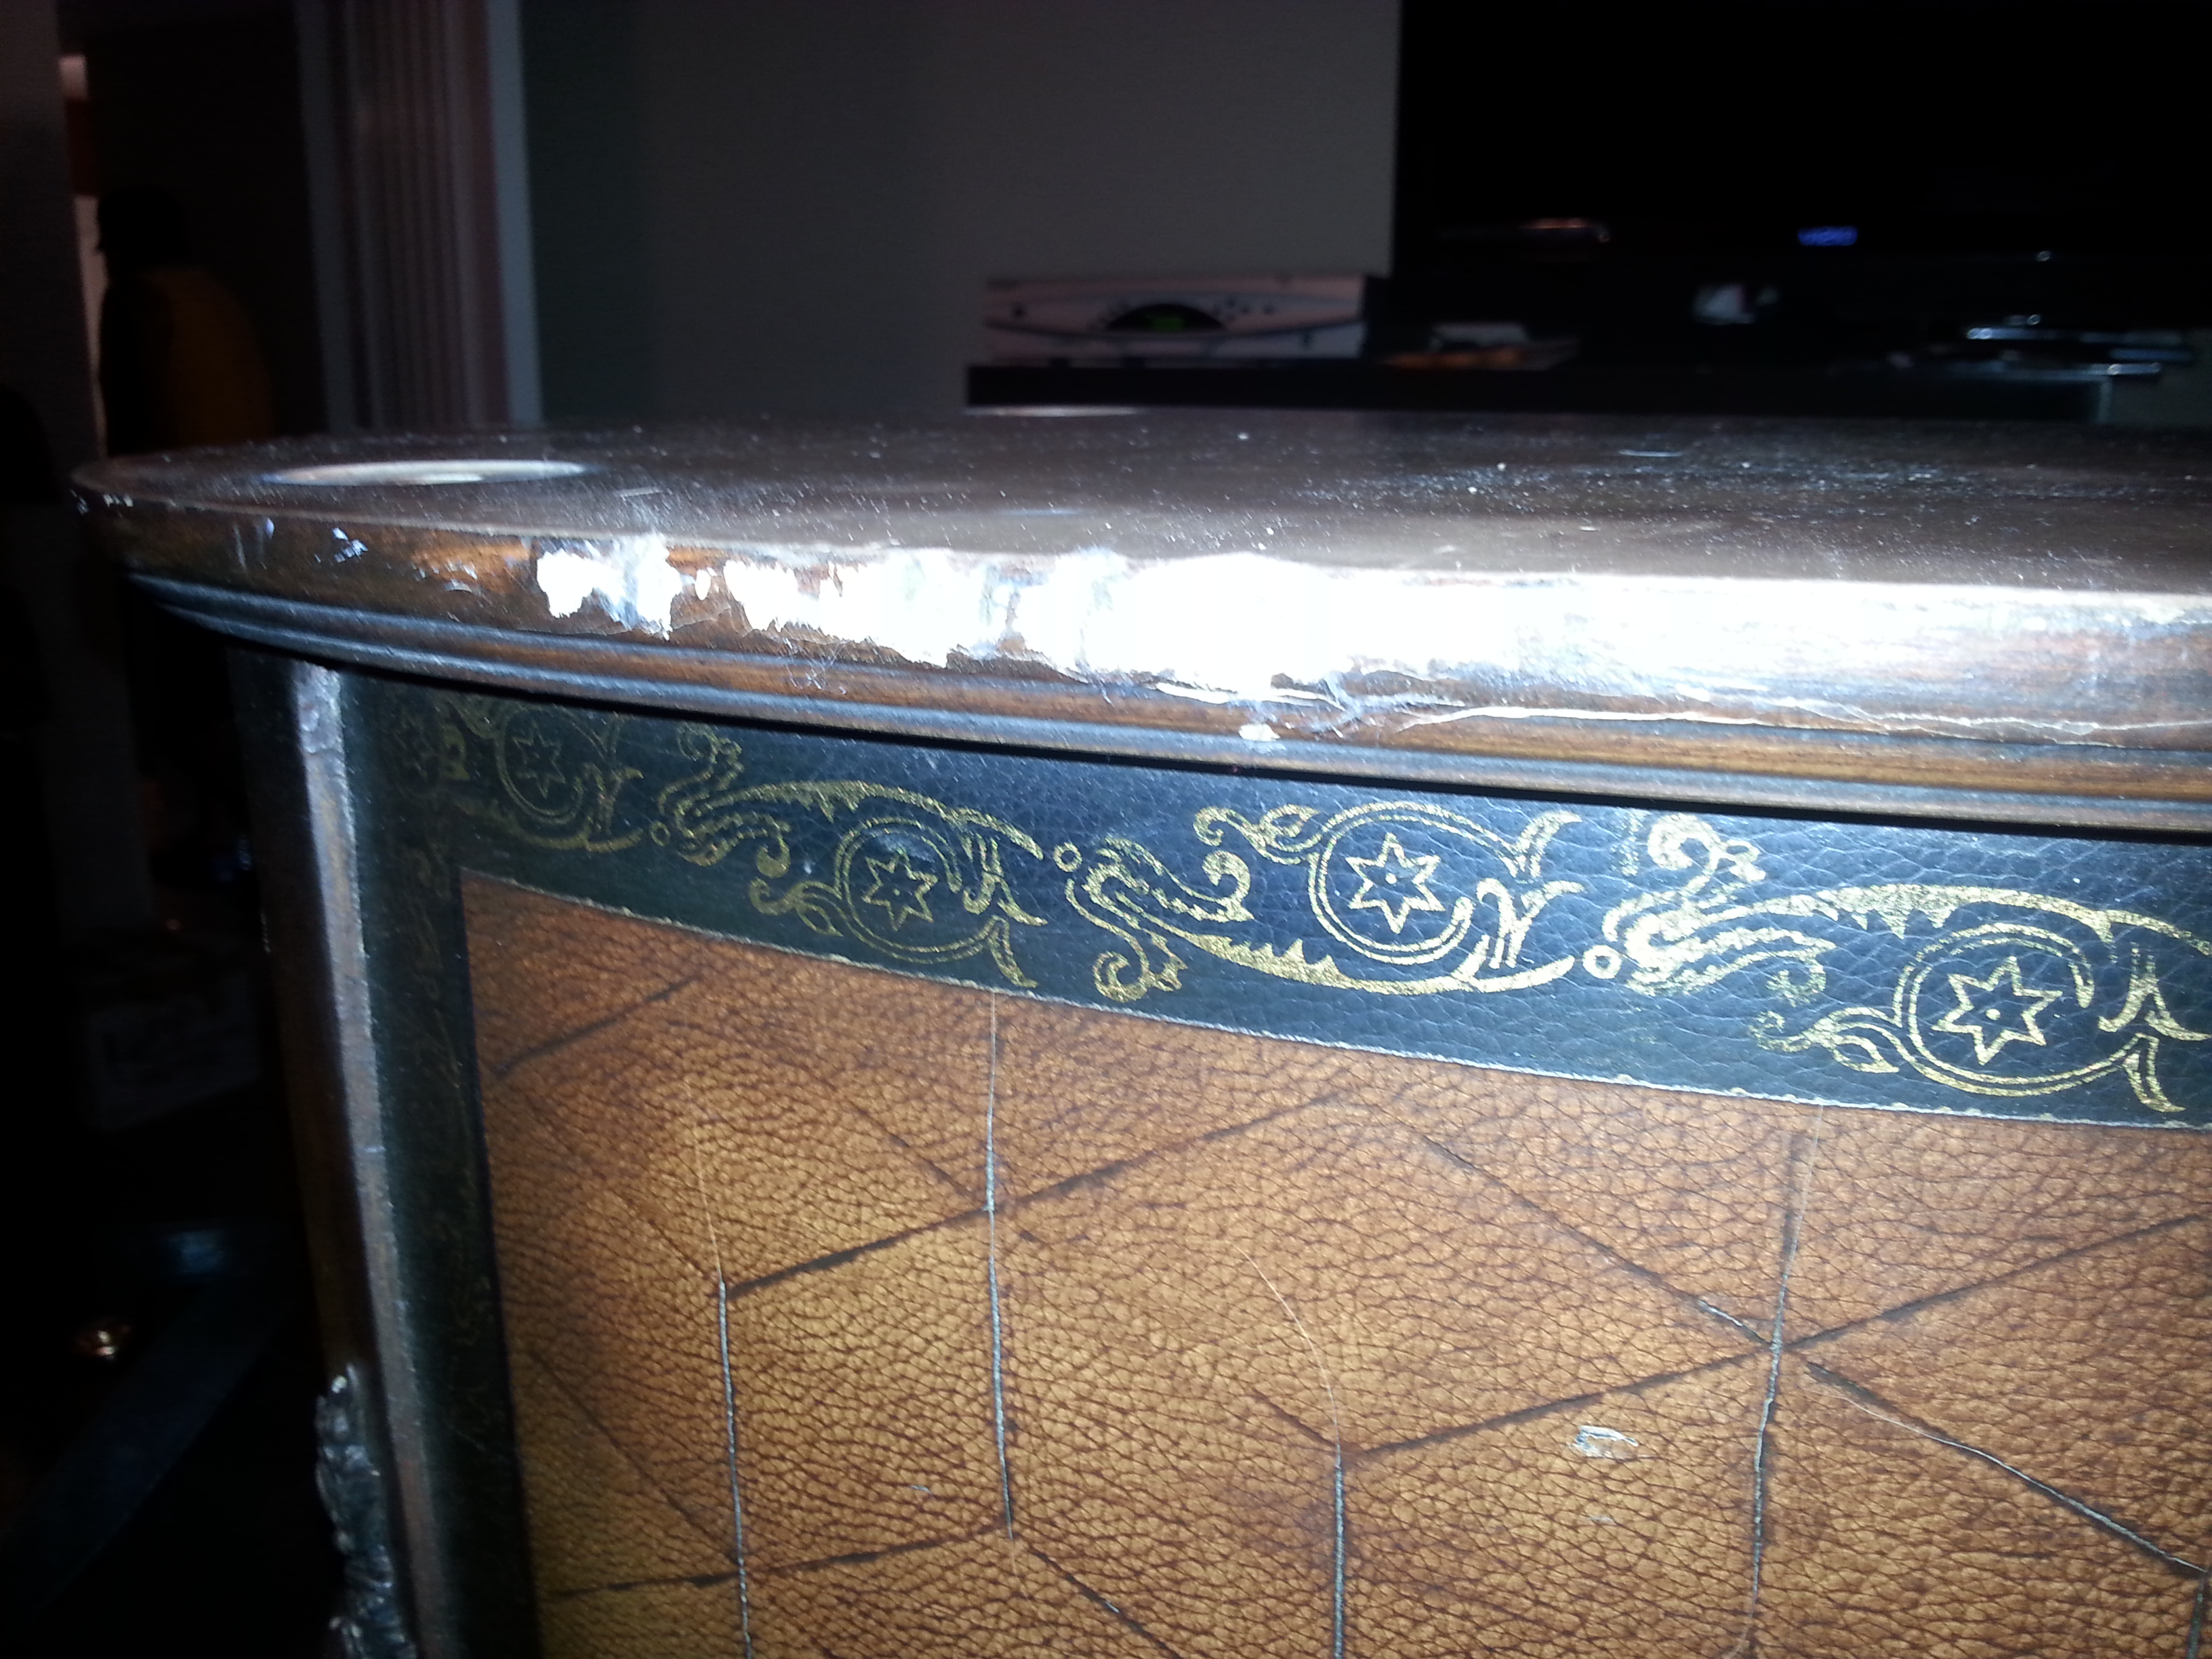 Damage to an antique table